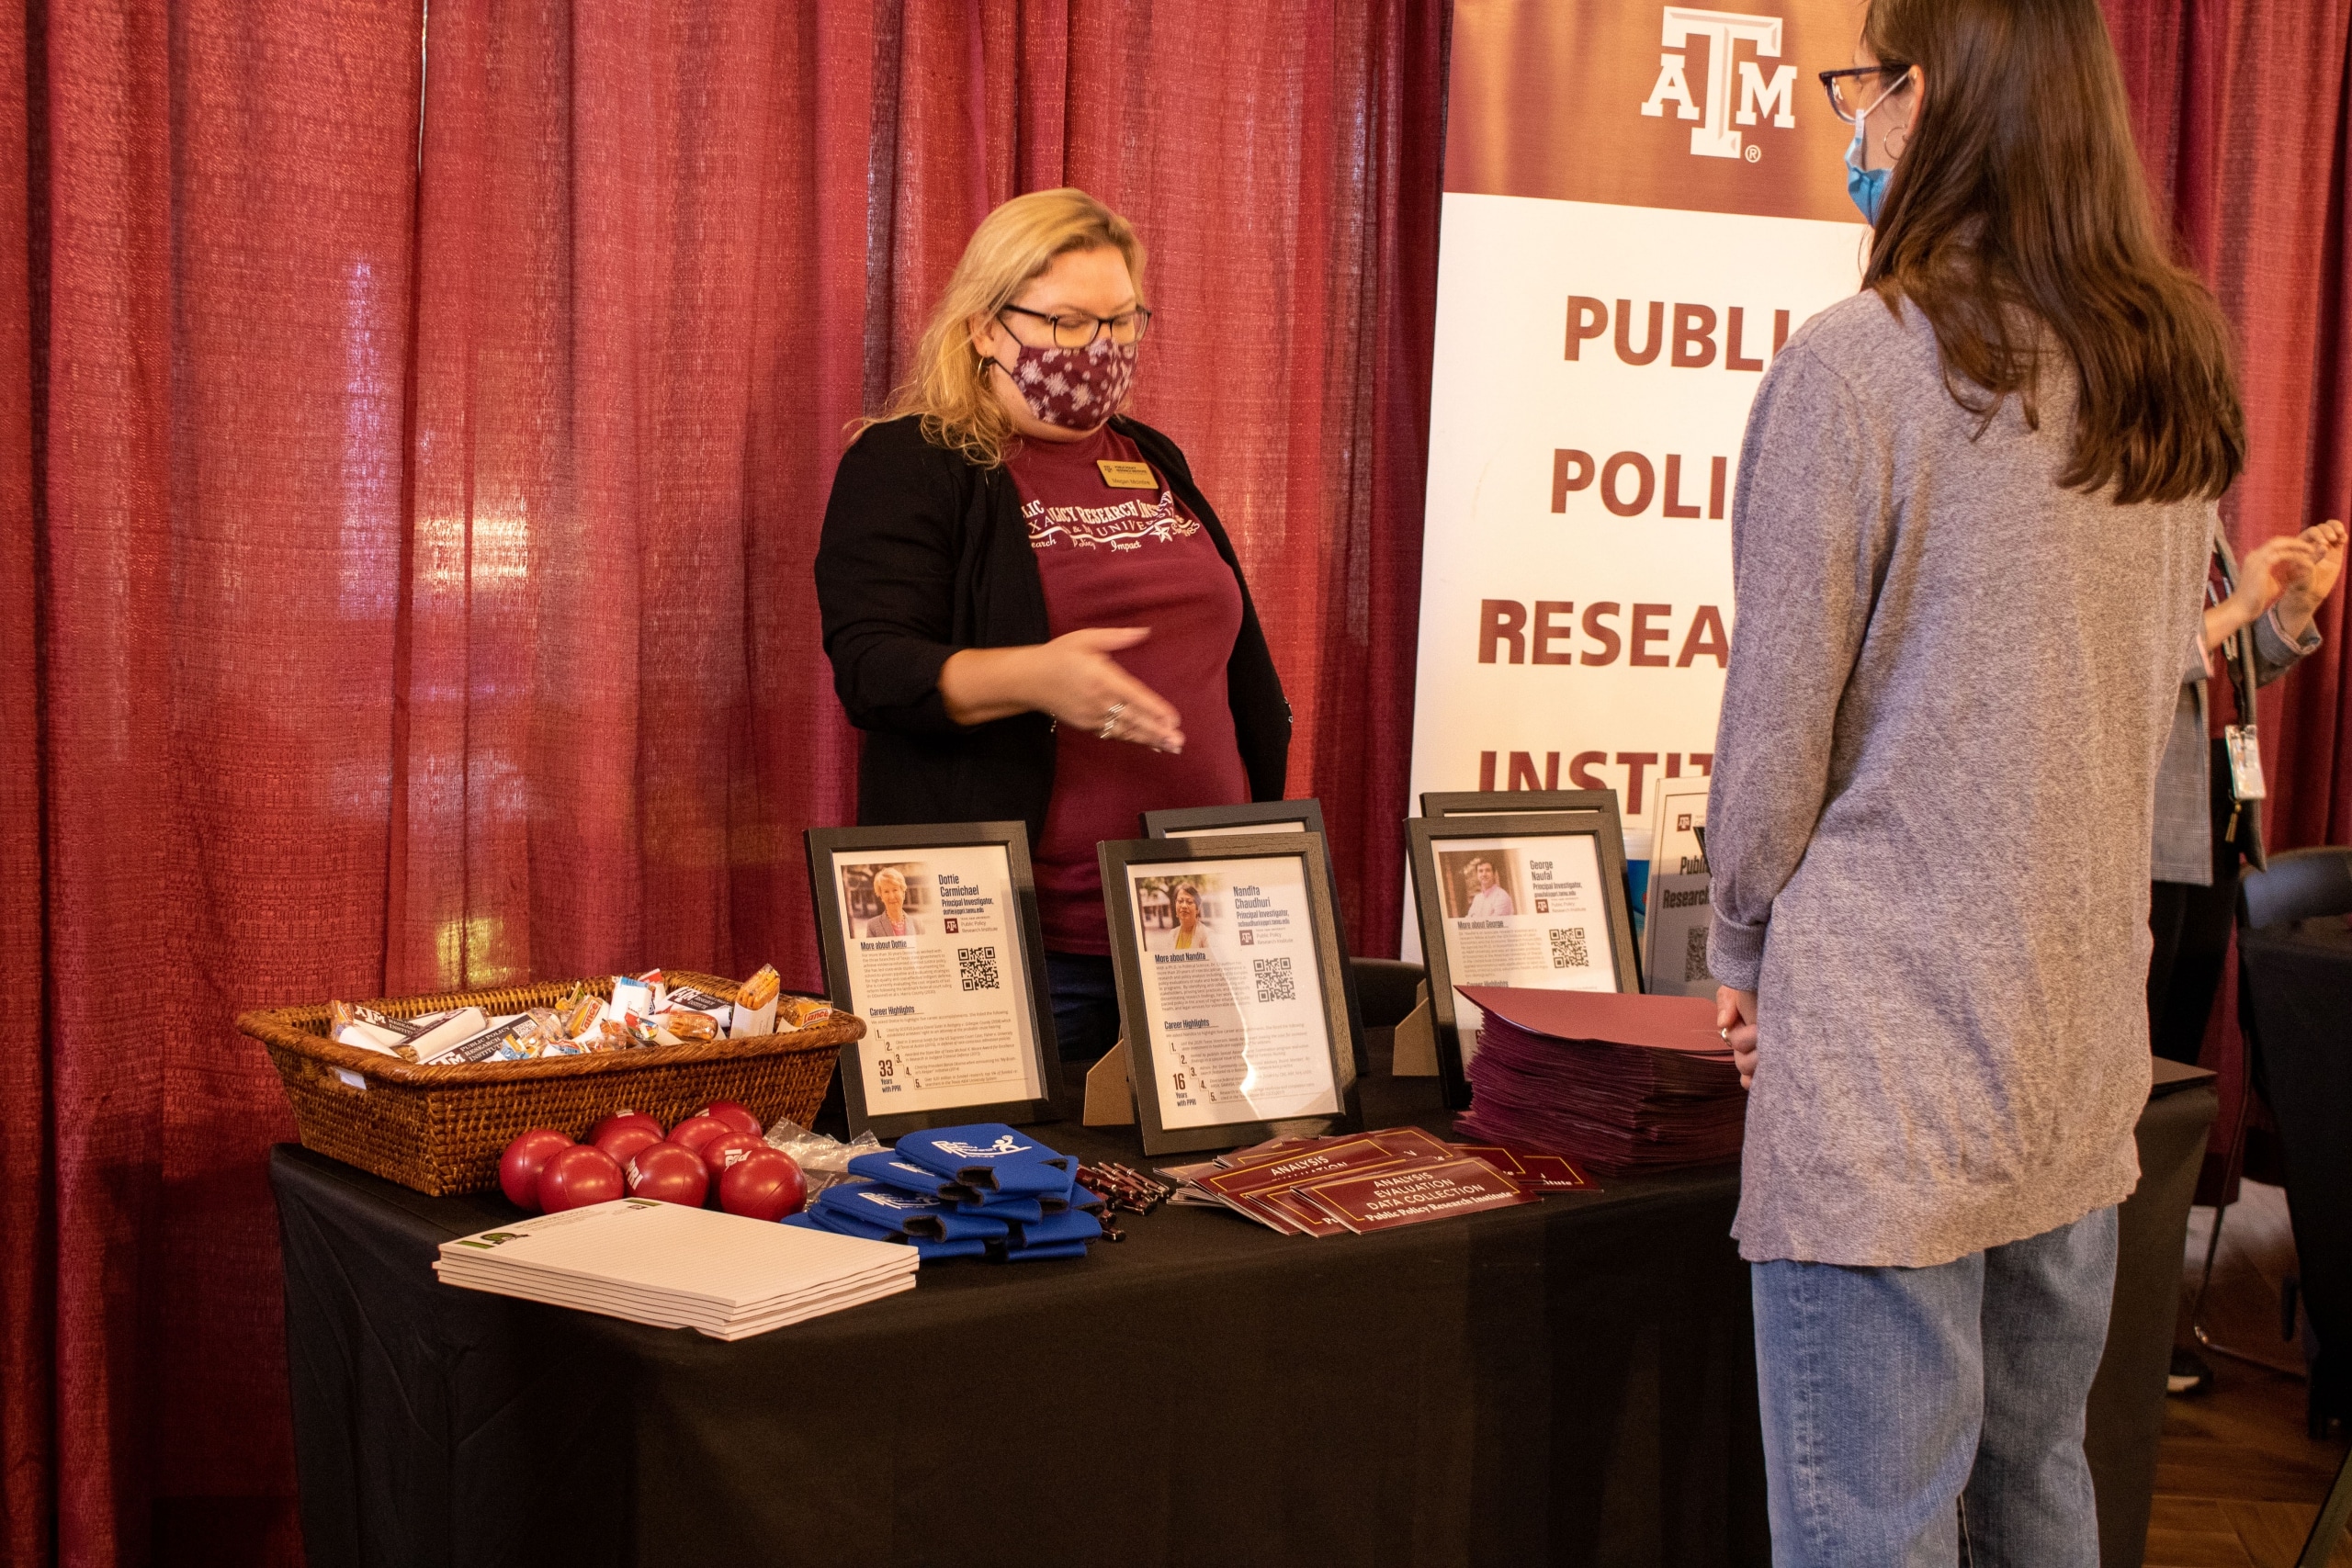 PPRI staff at centers and institutes booth